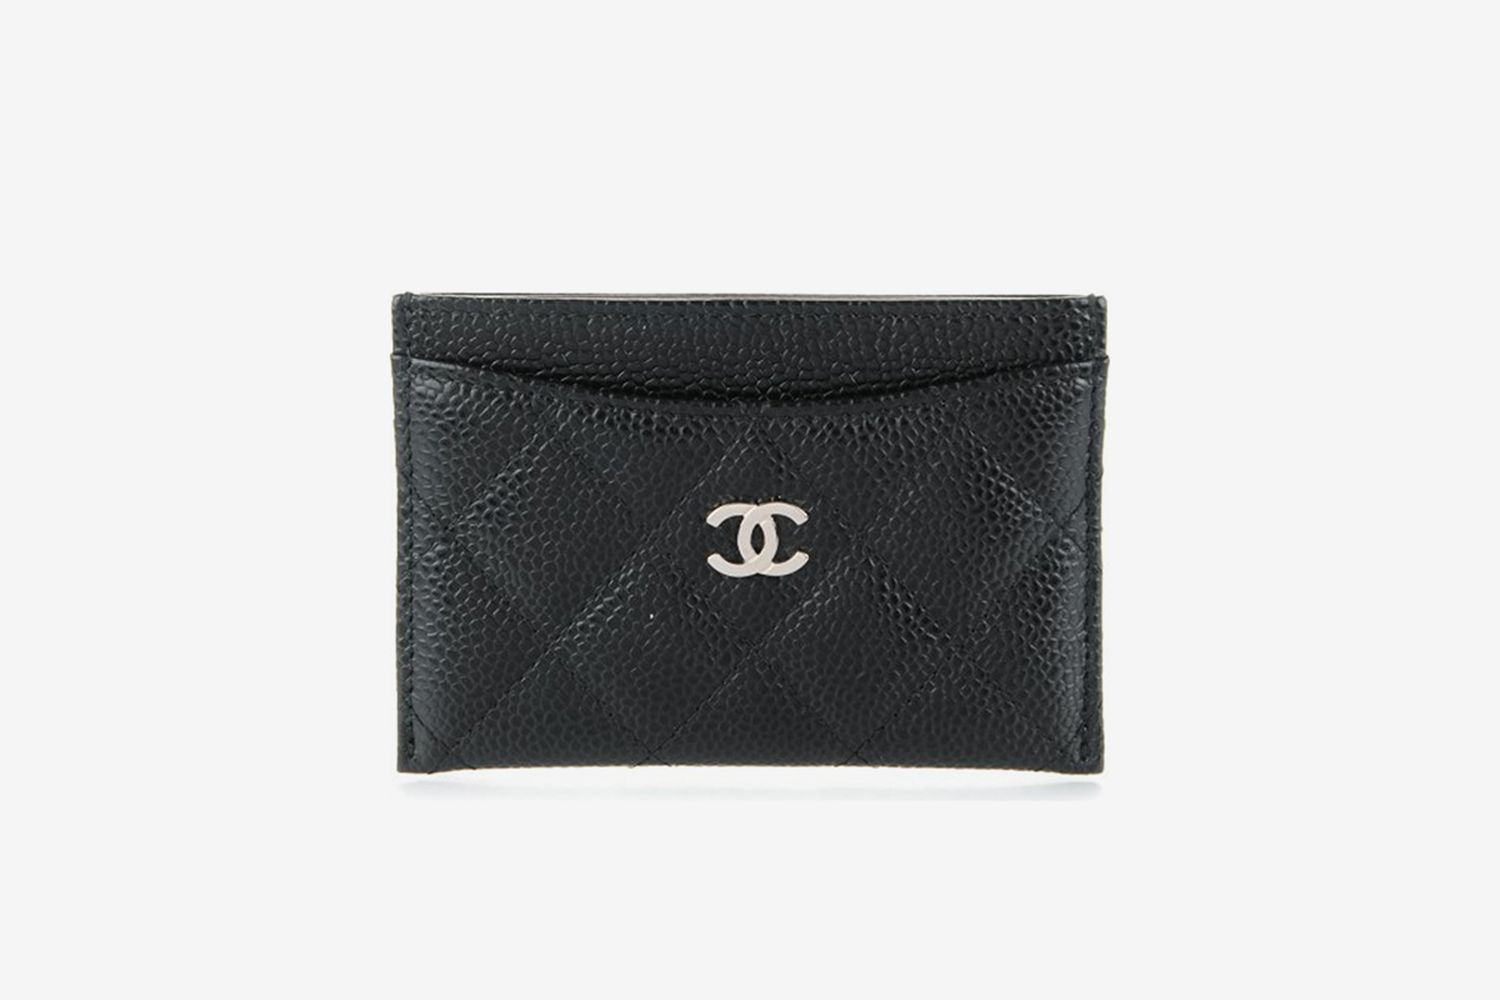 Chanel Accessories Every Man in Their Wardrobe